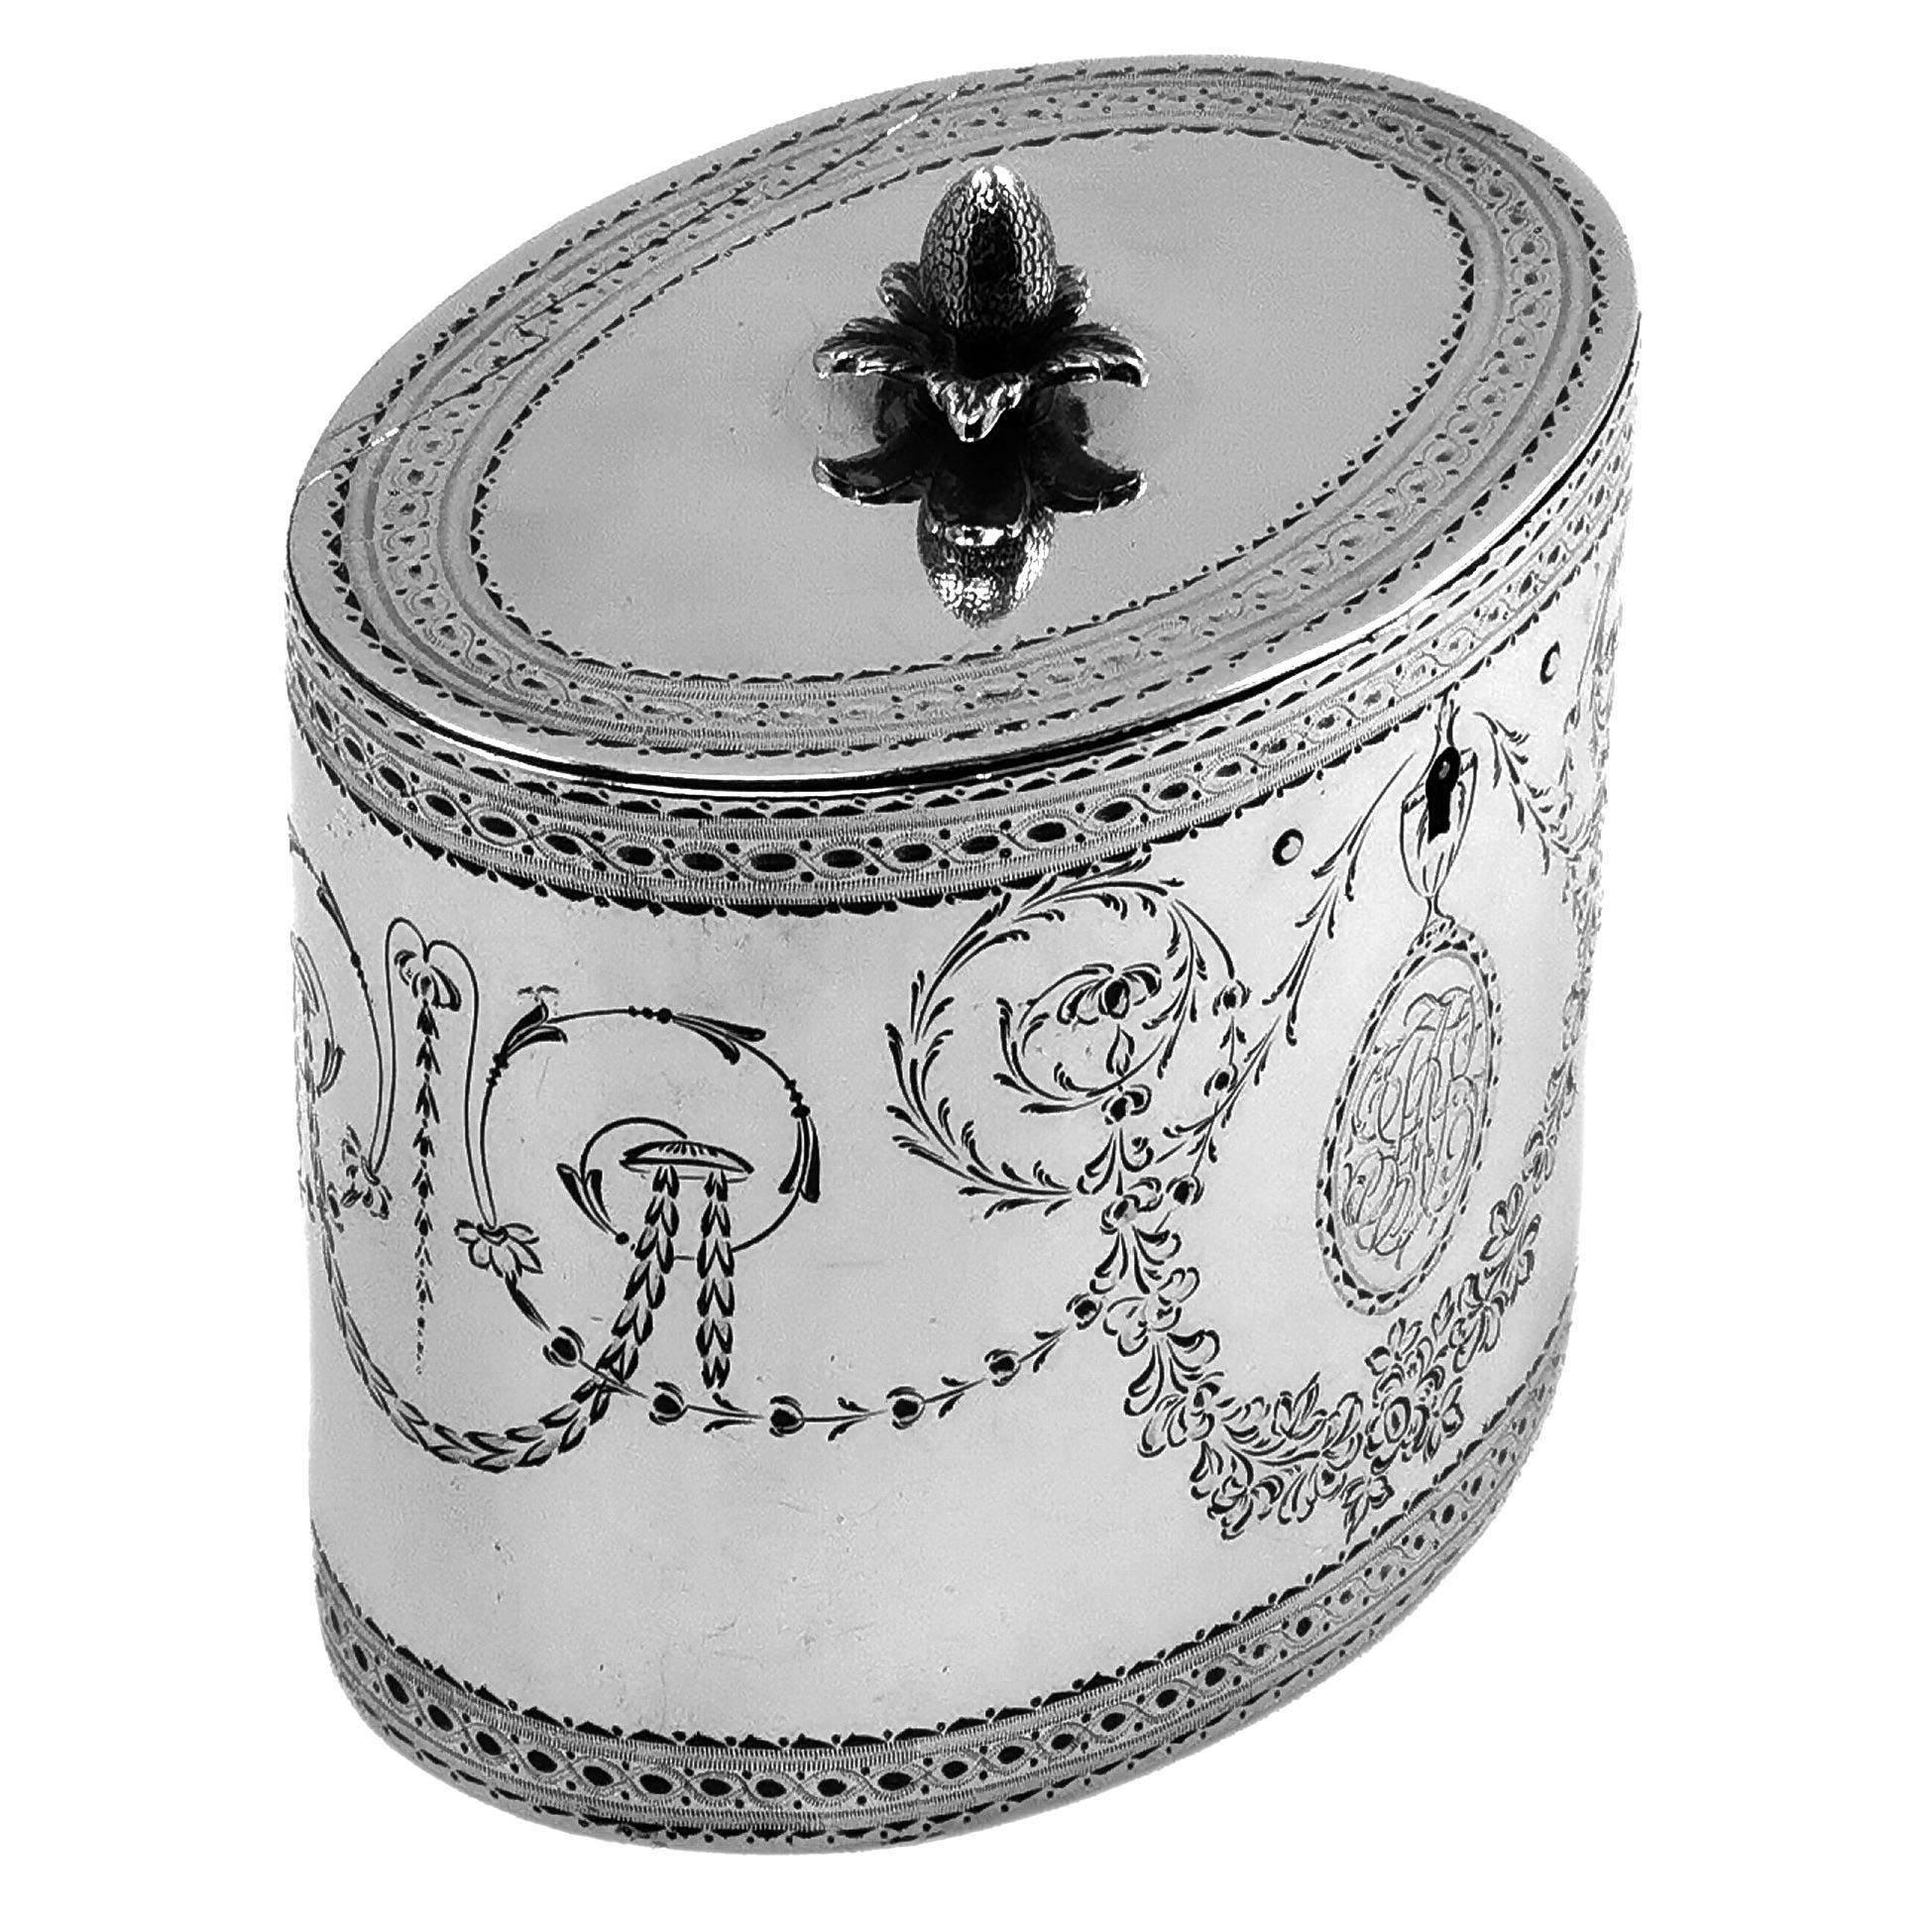 An antique George III solid Silver Tea Caddy in a classic straight sided oval form. The Tea Caddy has an elegant engraved pattern on the sides and in the flat hinged lid. The Caddy has a pair of engraved monograms in oval cartouches.

Made in